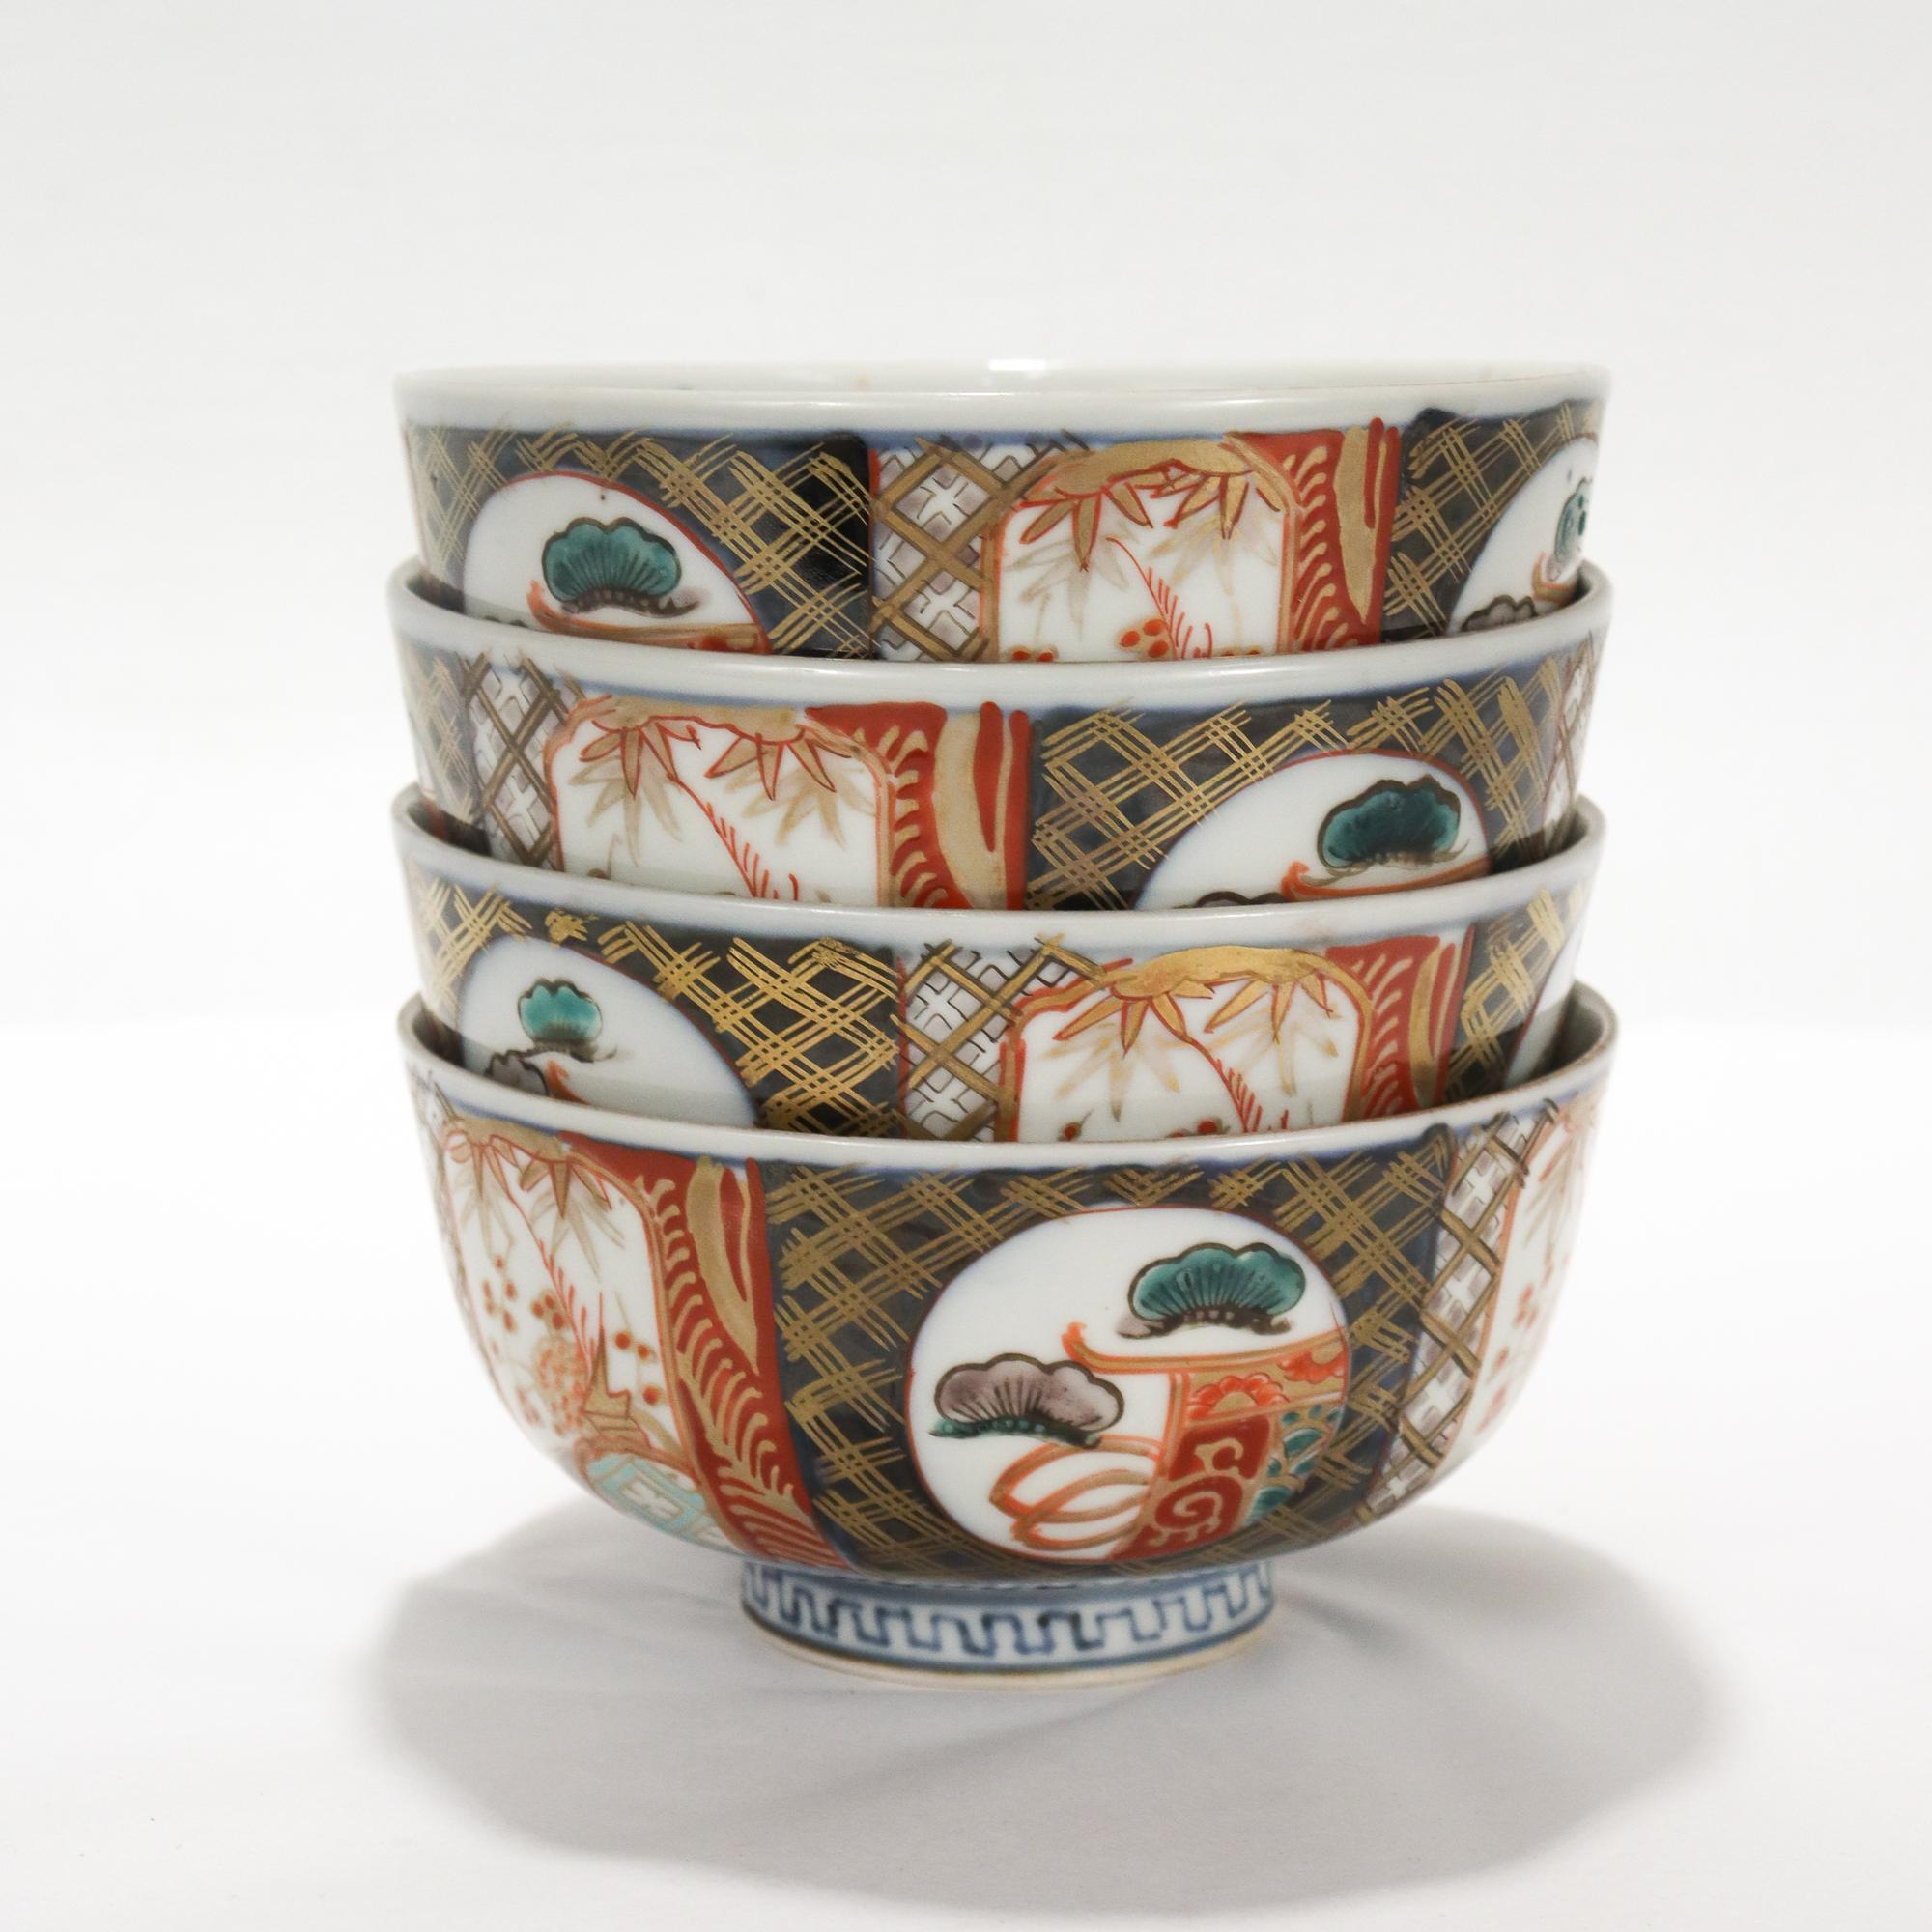 A fine set of 4 Japanese Imari porcelain bowls

Each decorated throughout with kaikemon blue, red, and green natural scenes and extensive gilding.

Marked to the base with a blue underglaze maker's mark for Kakufuku.

Simply a fine set of